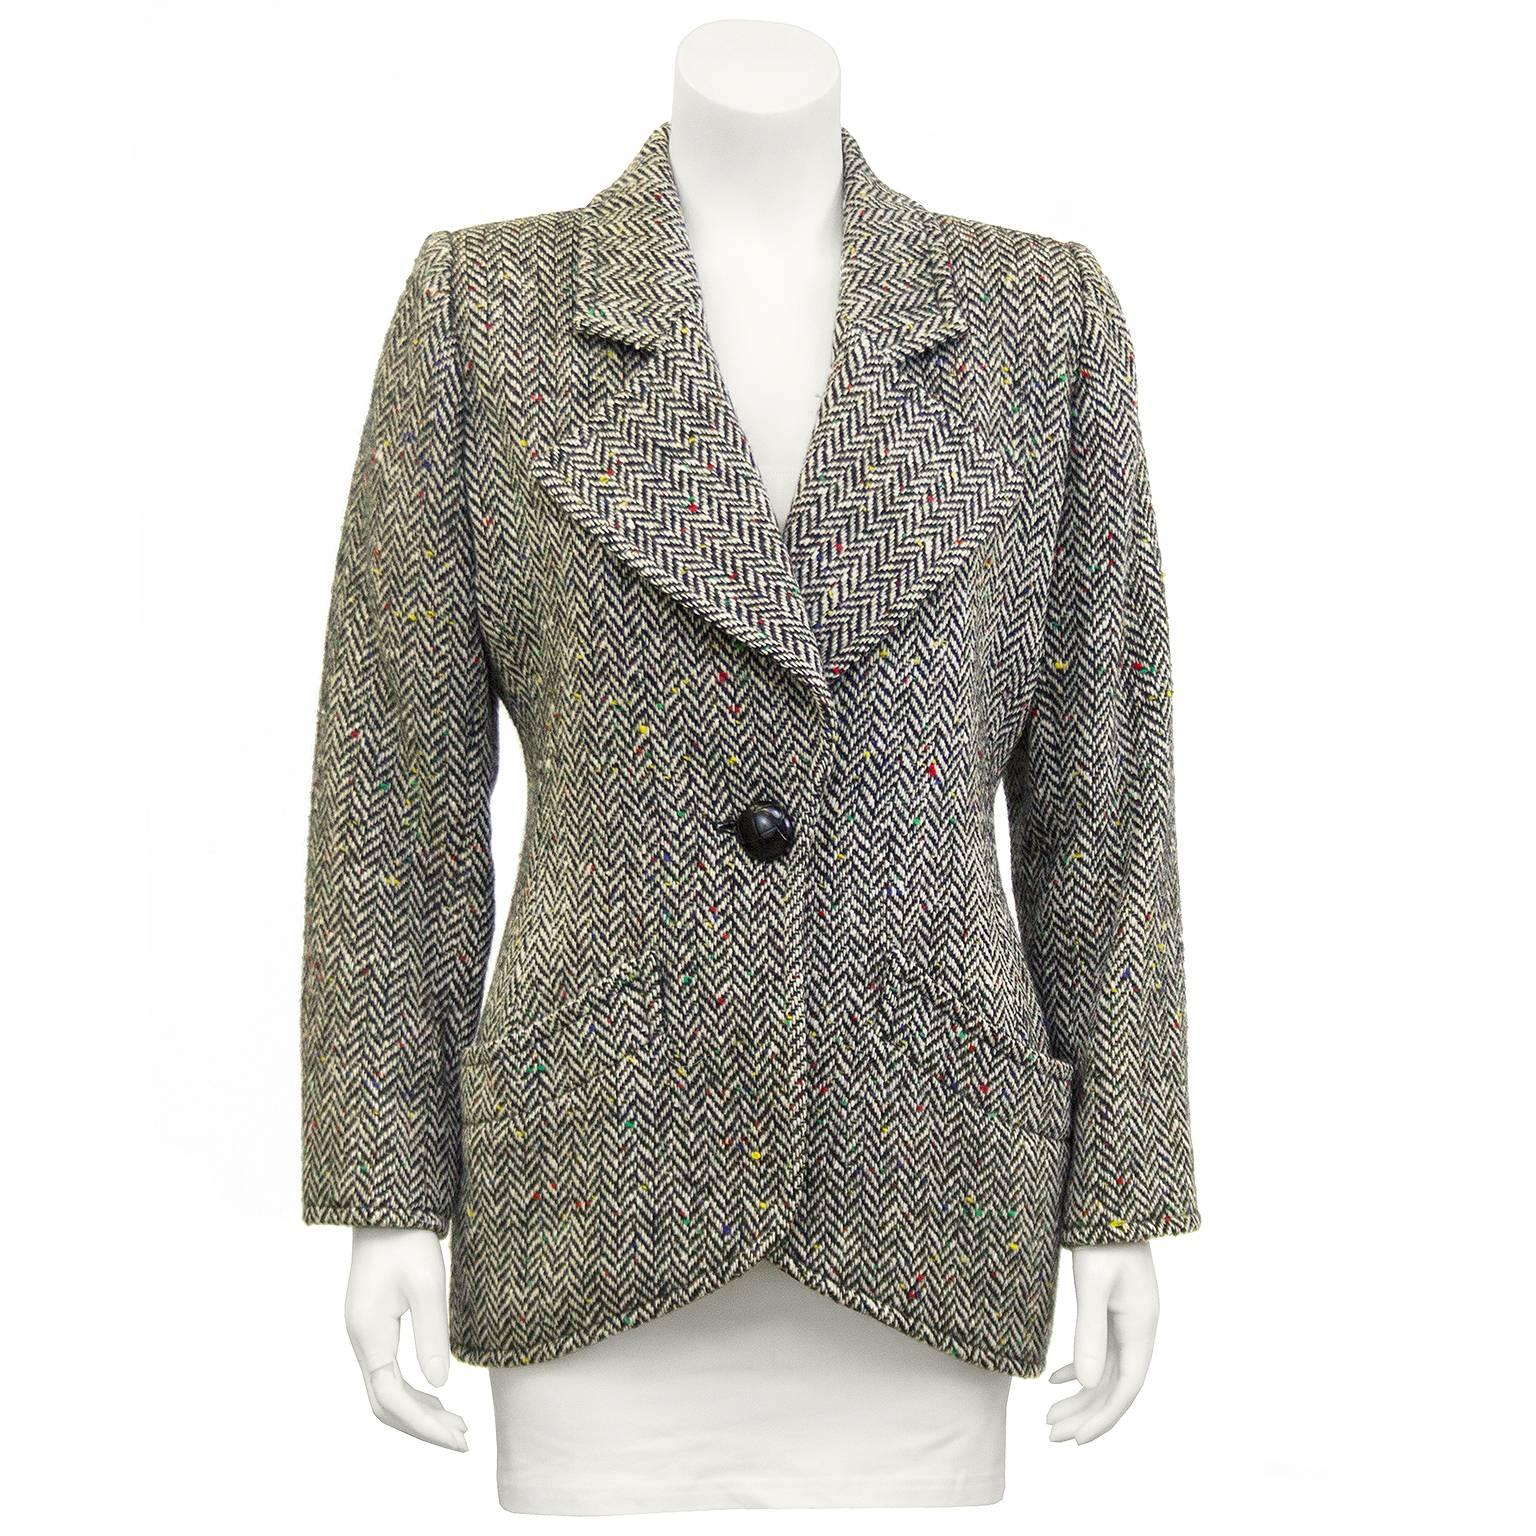 Yves Saint Laurent jacket dating from the 1980s. Black and white herringbone wool with yellow, red, green, and blue specks throughout. Equestrian style with large faux weaved black button. Domed black plastic buttons at cuffs and diagonally cut slit